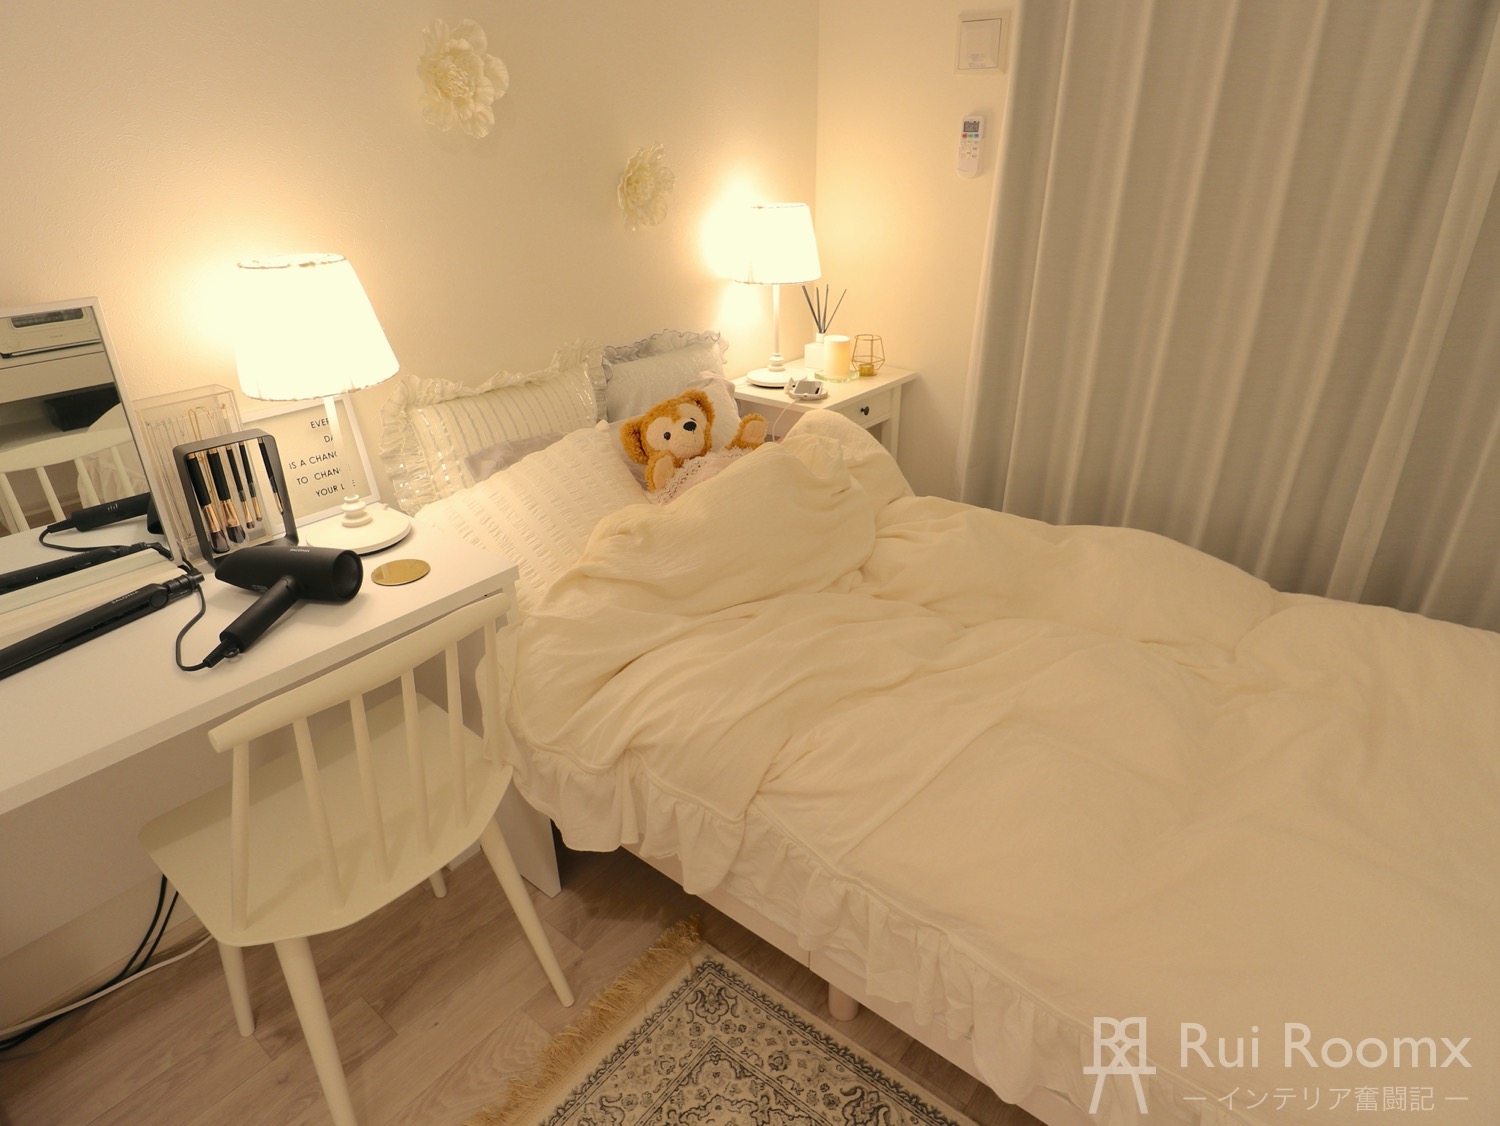 ruiroomx night bedroom how-to-chose-a-bed